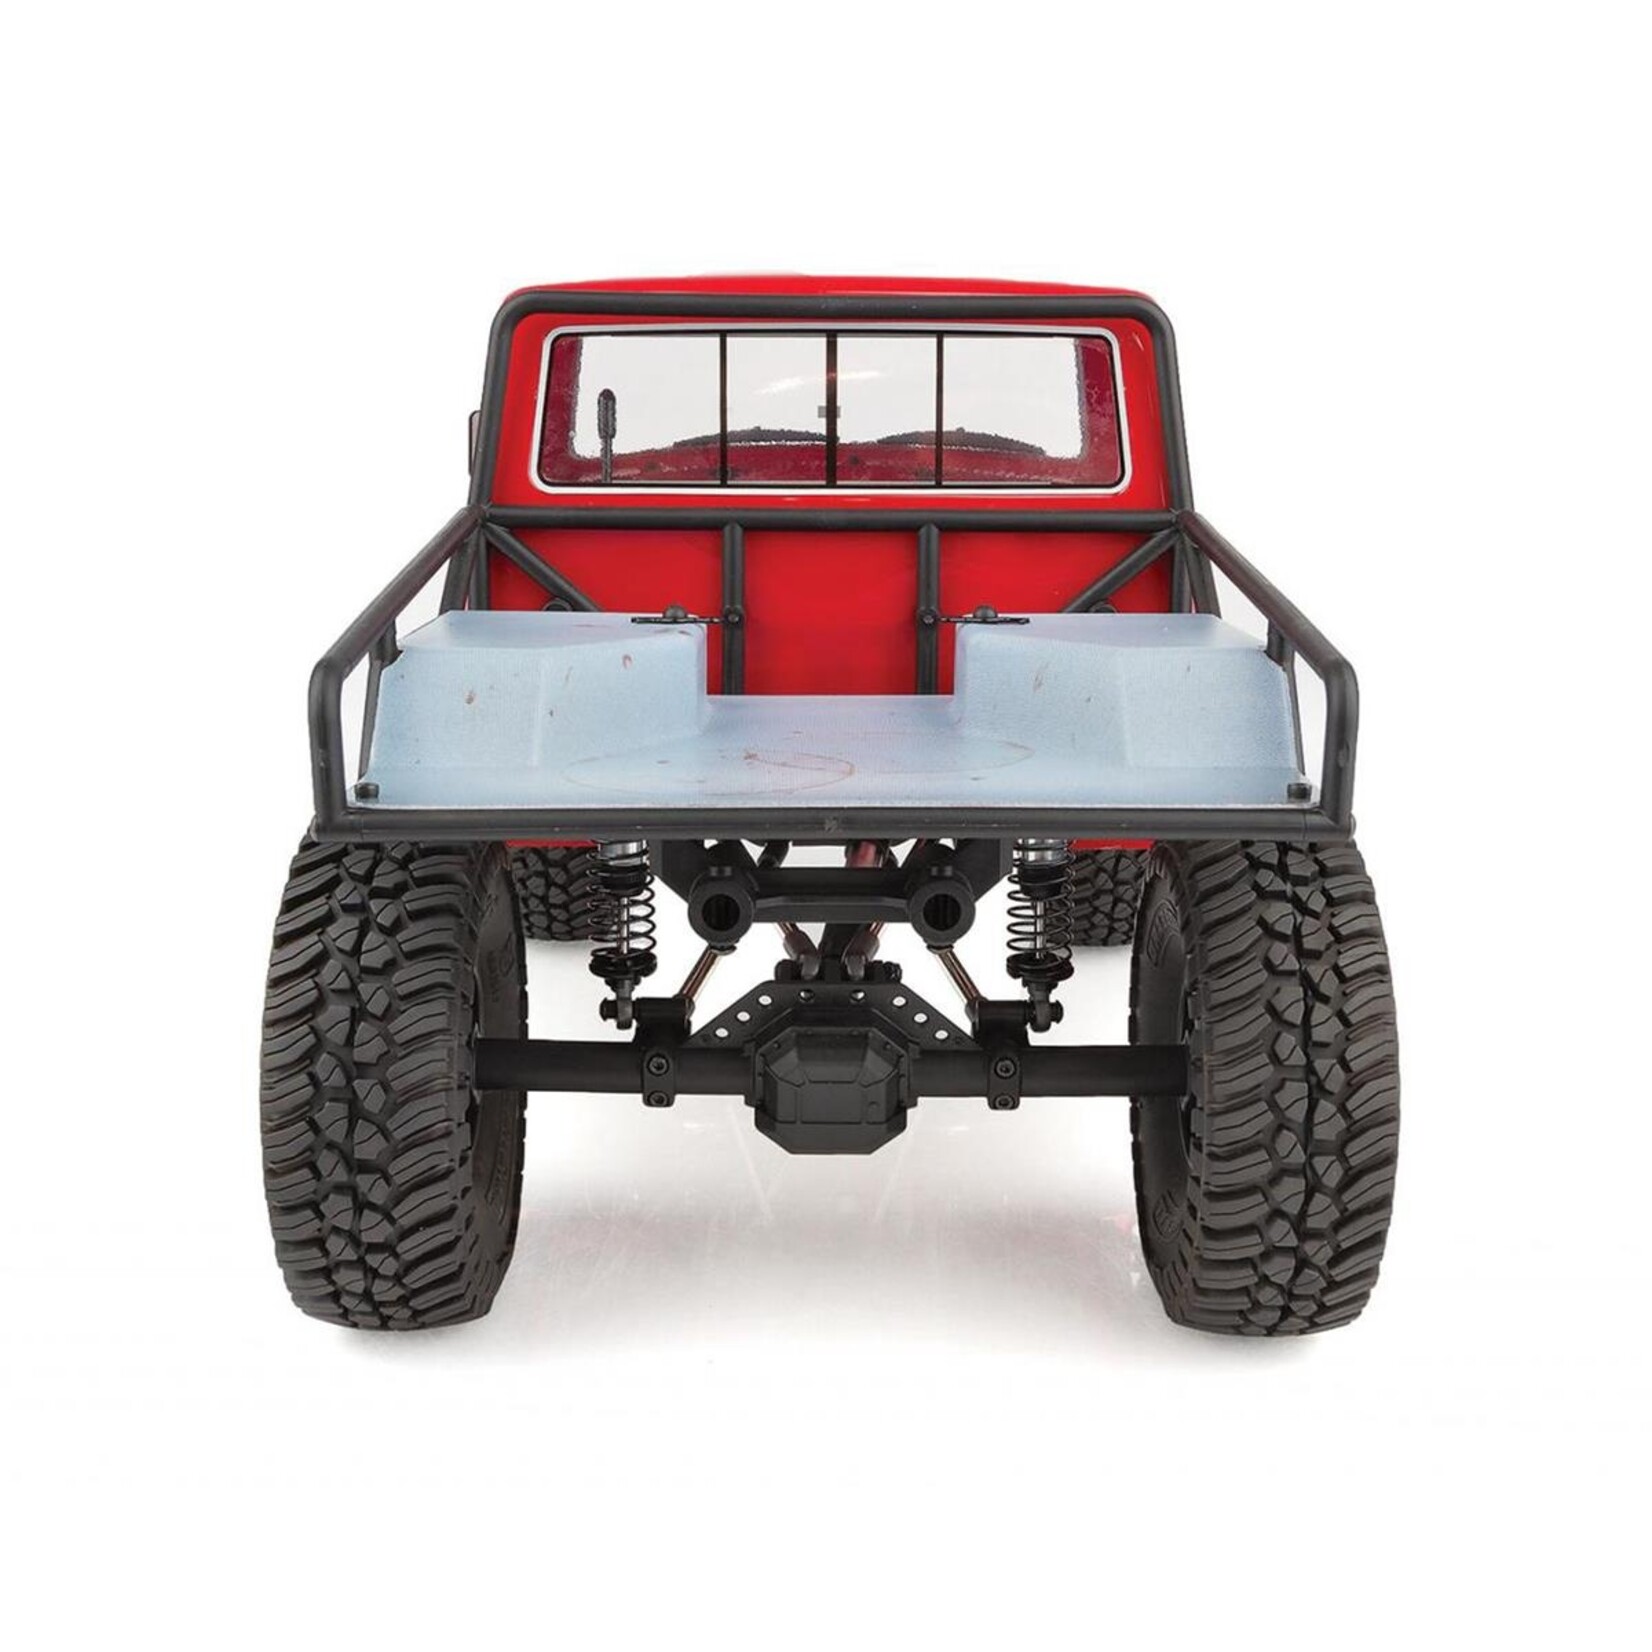 Element RC Element RC Enduro Sendero HD 4x4 RTR 1/10 Rock Crawler Combo (Red) w/2.4GHz Radio, Battery & Charger #40105C